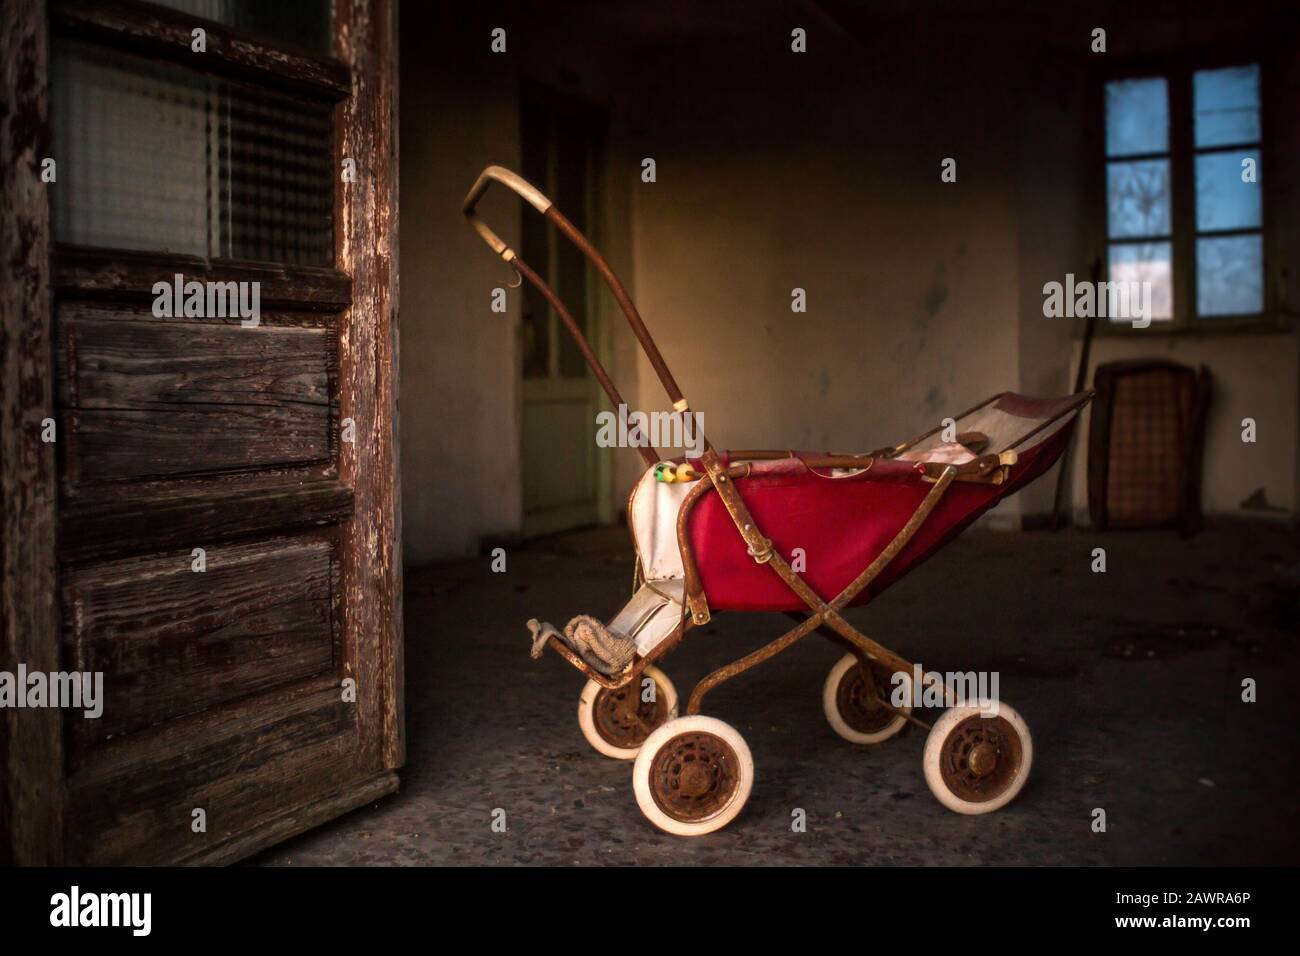 Old rusty baby carriage inside a building with weathered doors and windows Stock Photo